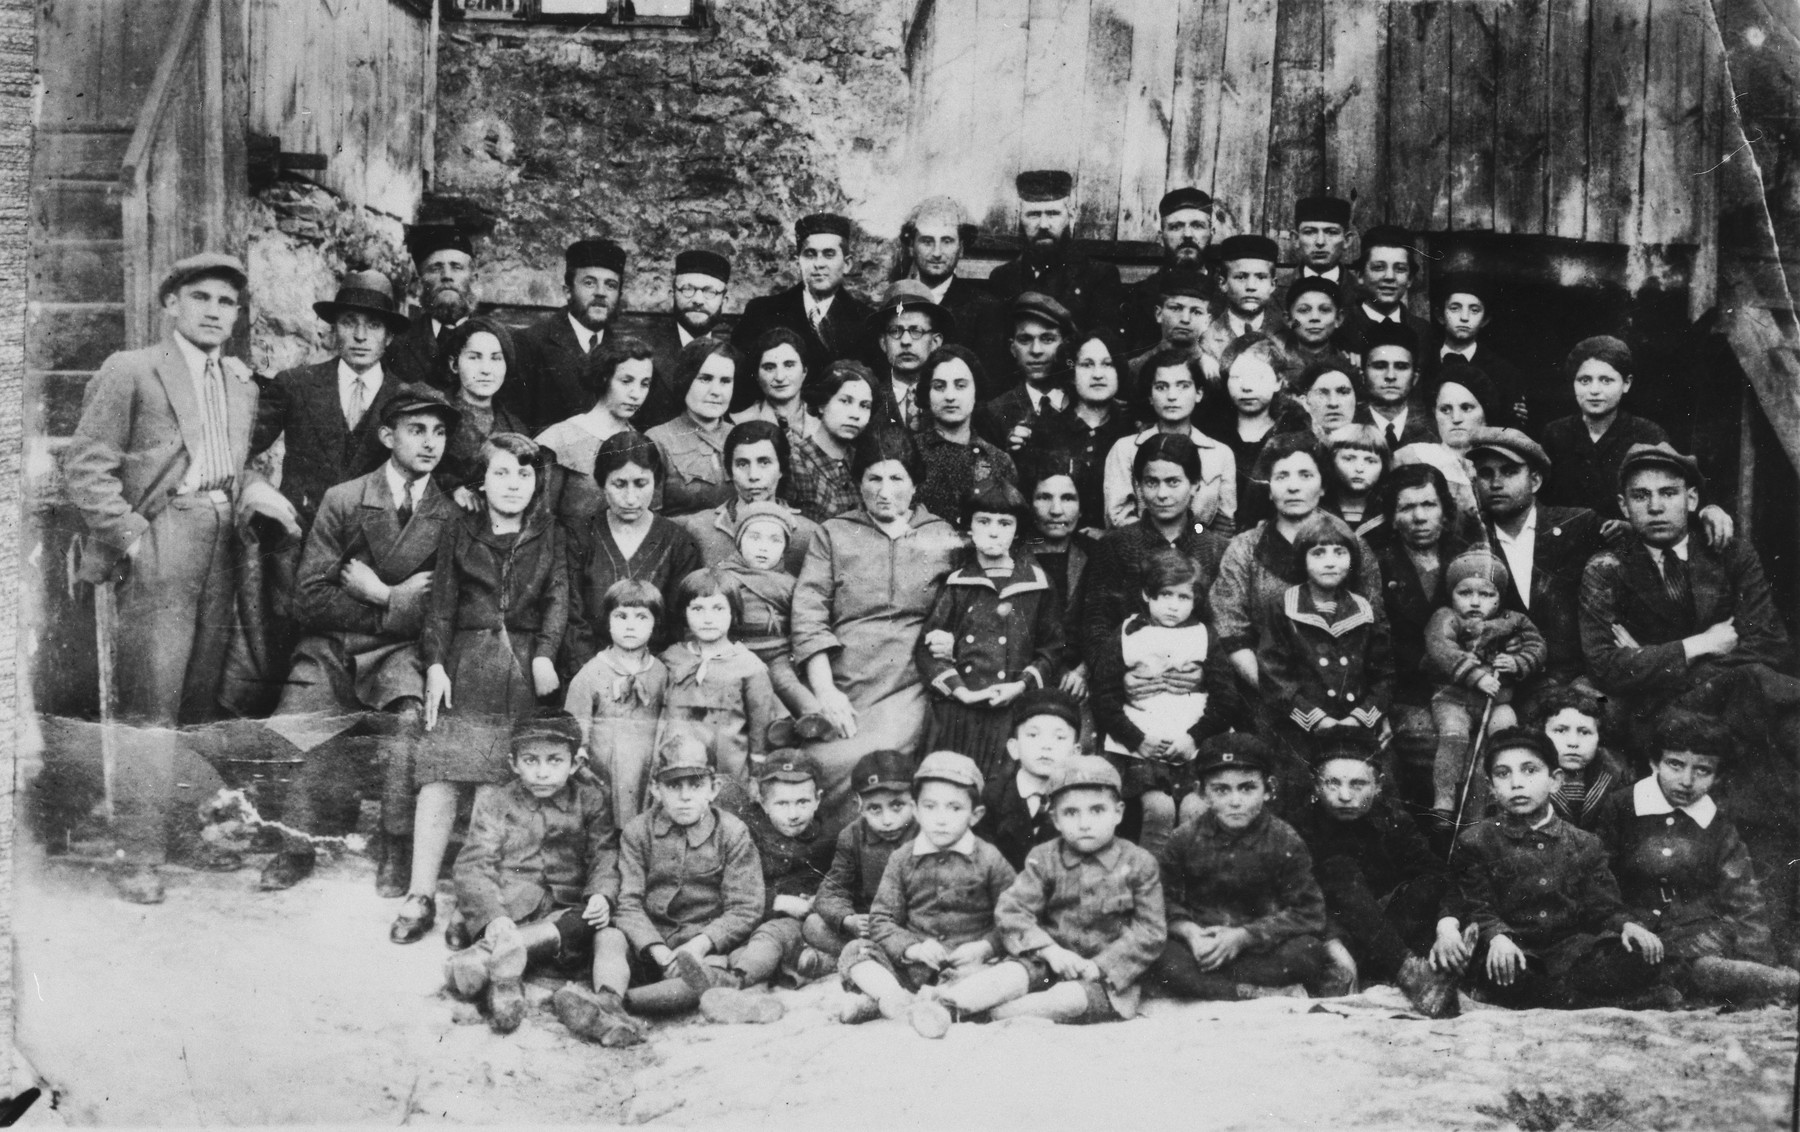 Group portrait of the extended family of Mottle Leichter in Janow Podlaski, Poland.  

The photo was taken on the occasion of the departure of one family member to Palestine.  Only three of those pictured survived the Holocaust, including two who left Poland before the war.